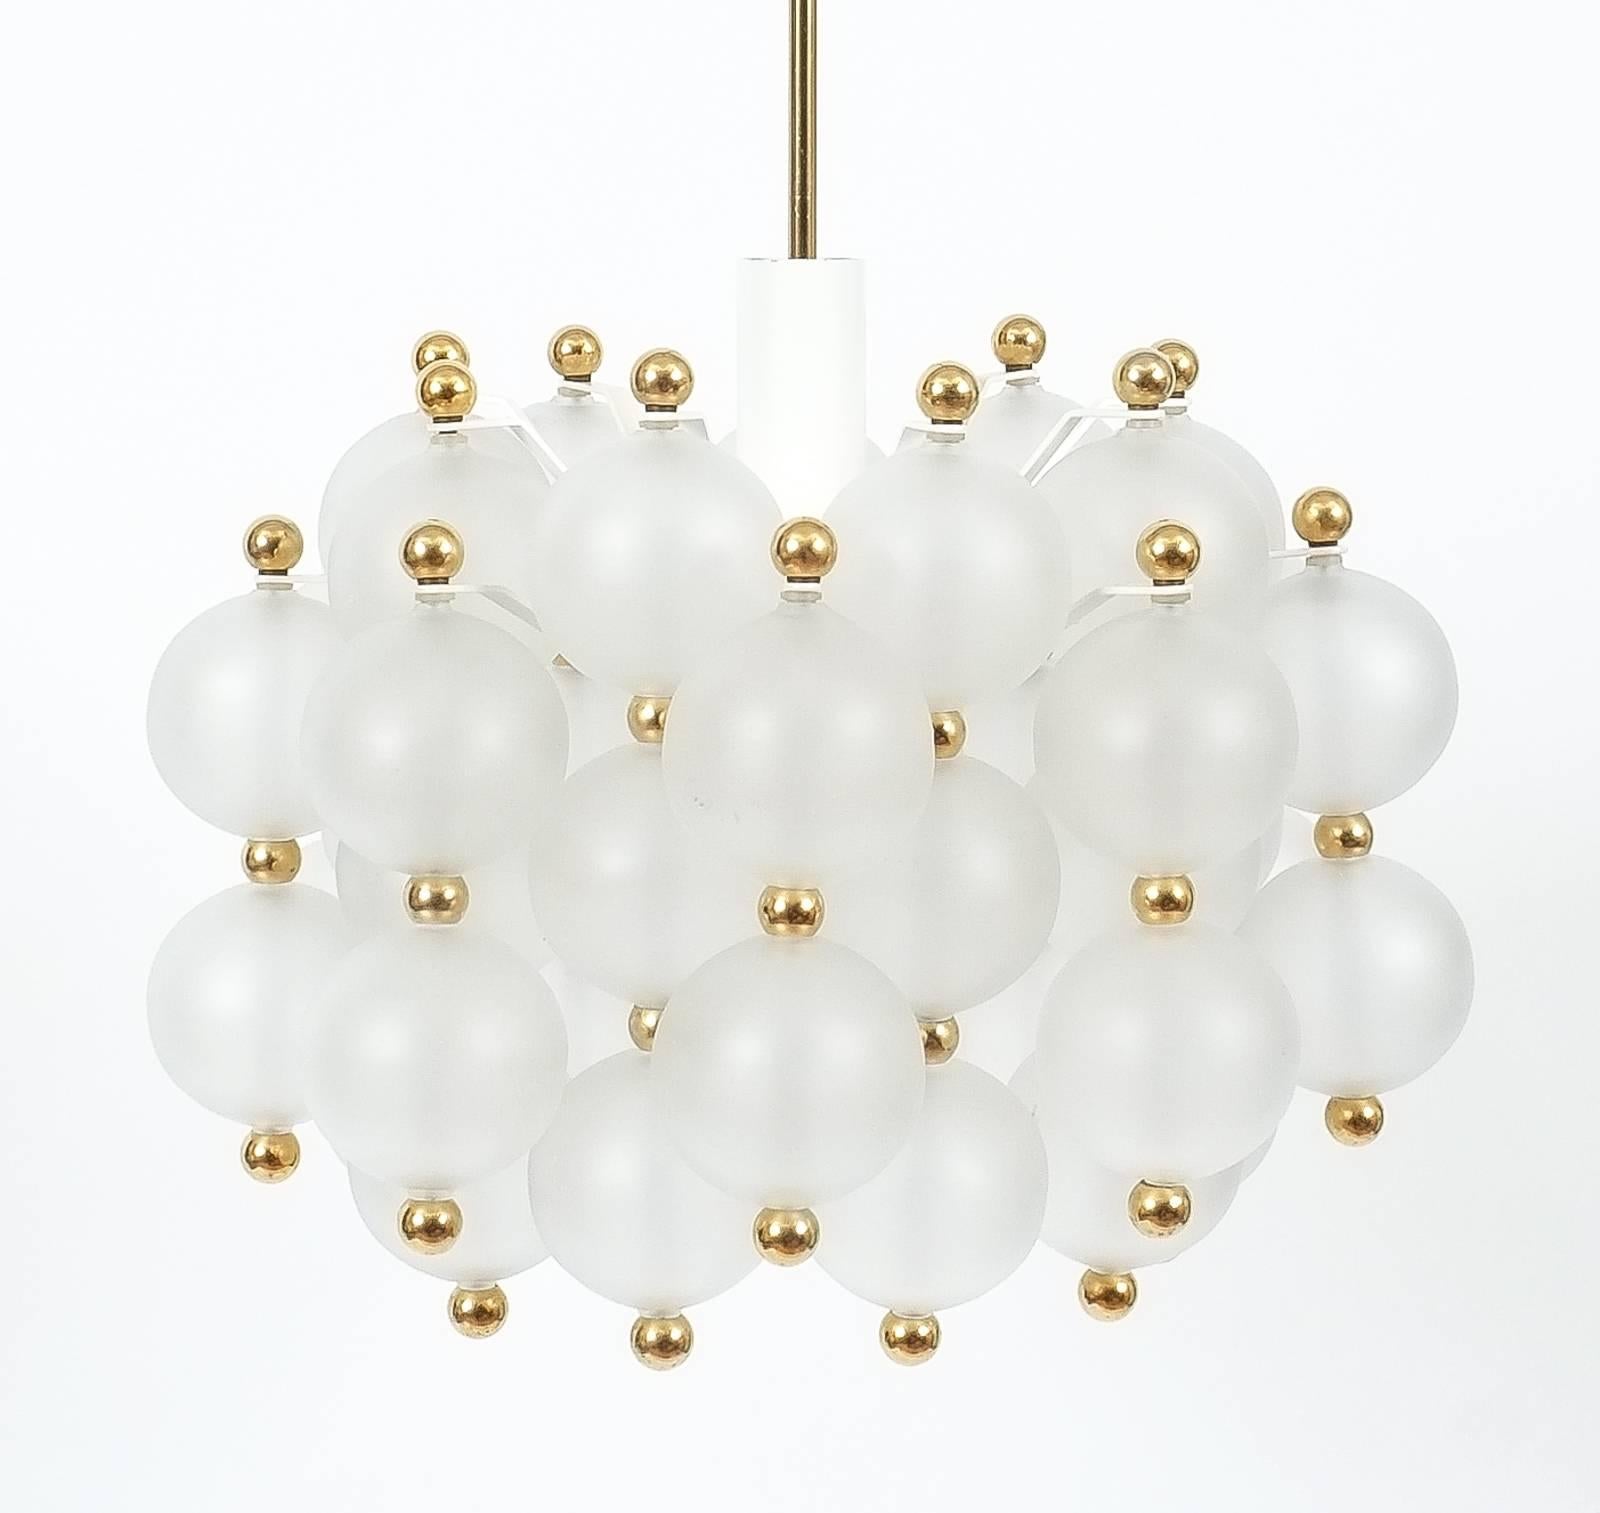 Enameled Satin Glass Chandelier Lamp By Kinkeldey With Gold Knobs, circa 1980 For Sale